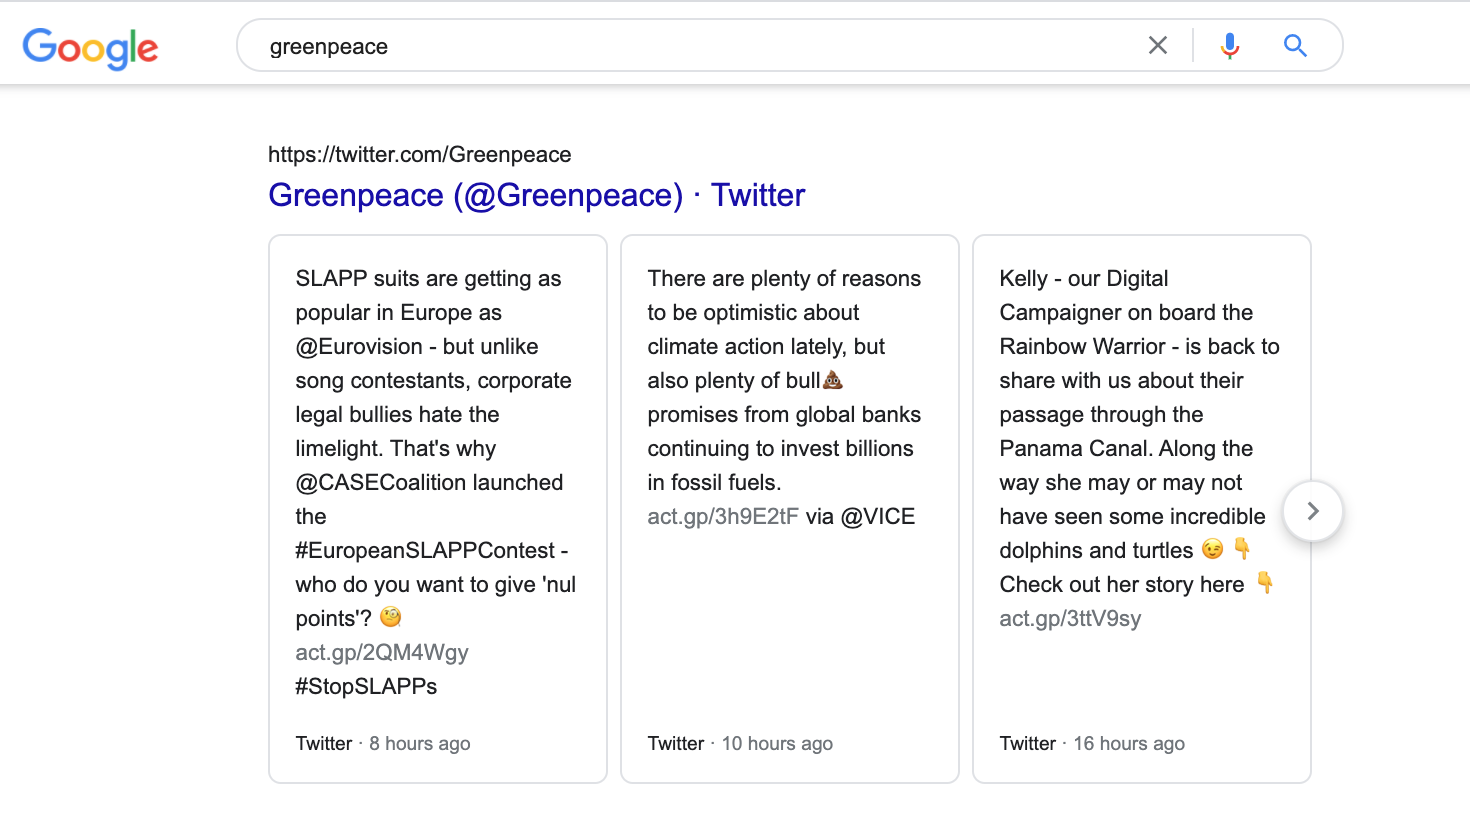 Twitter search results on Greenpeace.